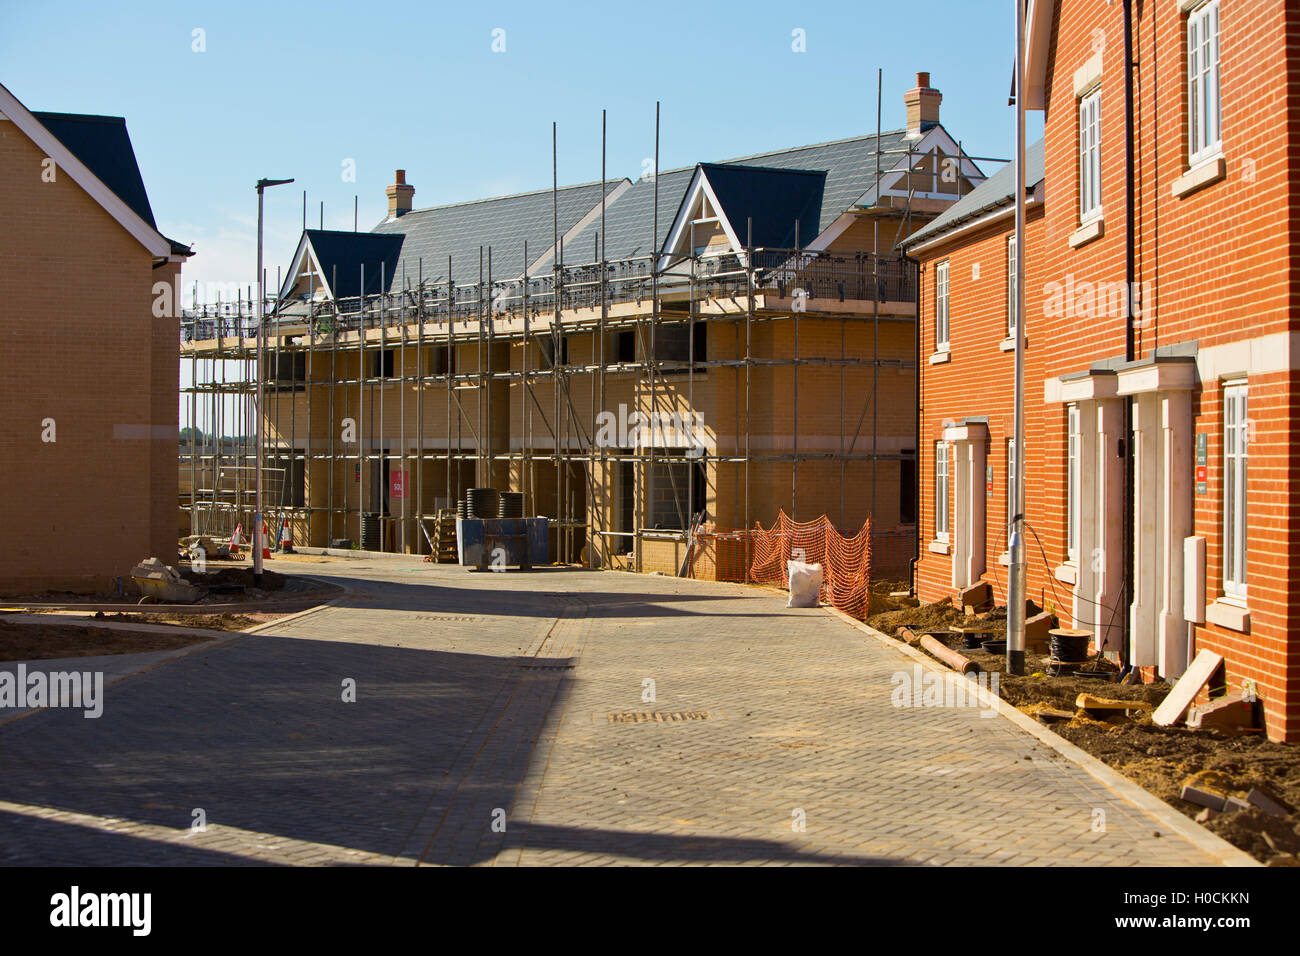 A new development of affordable homes Stock Photo